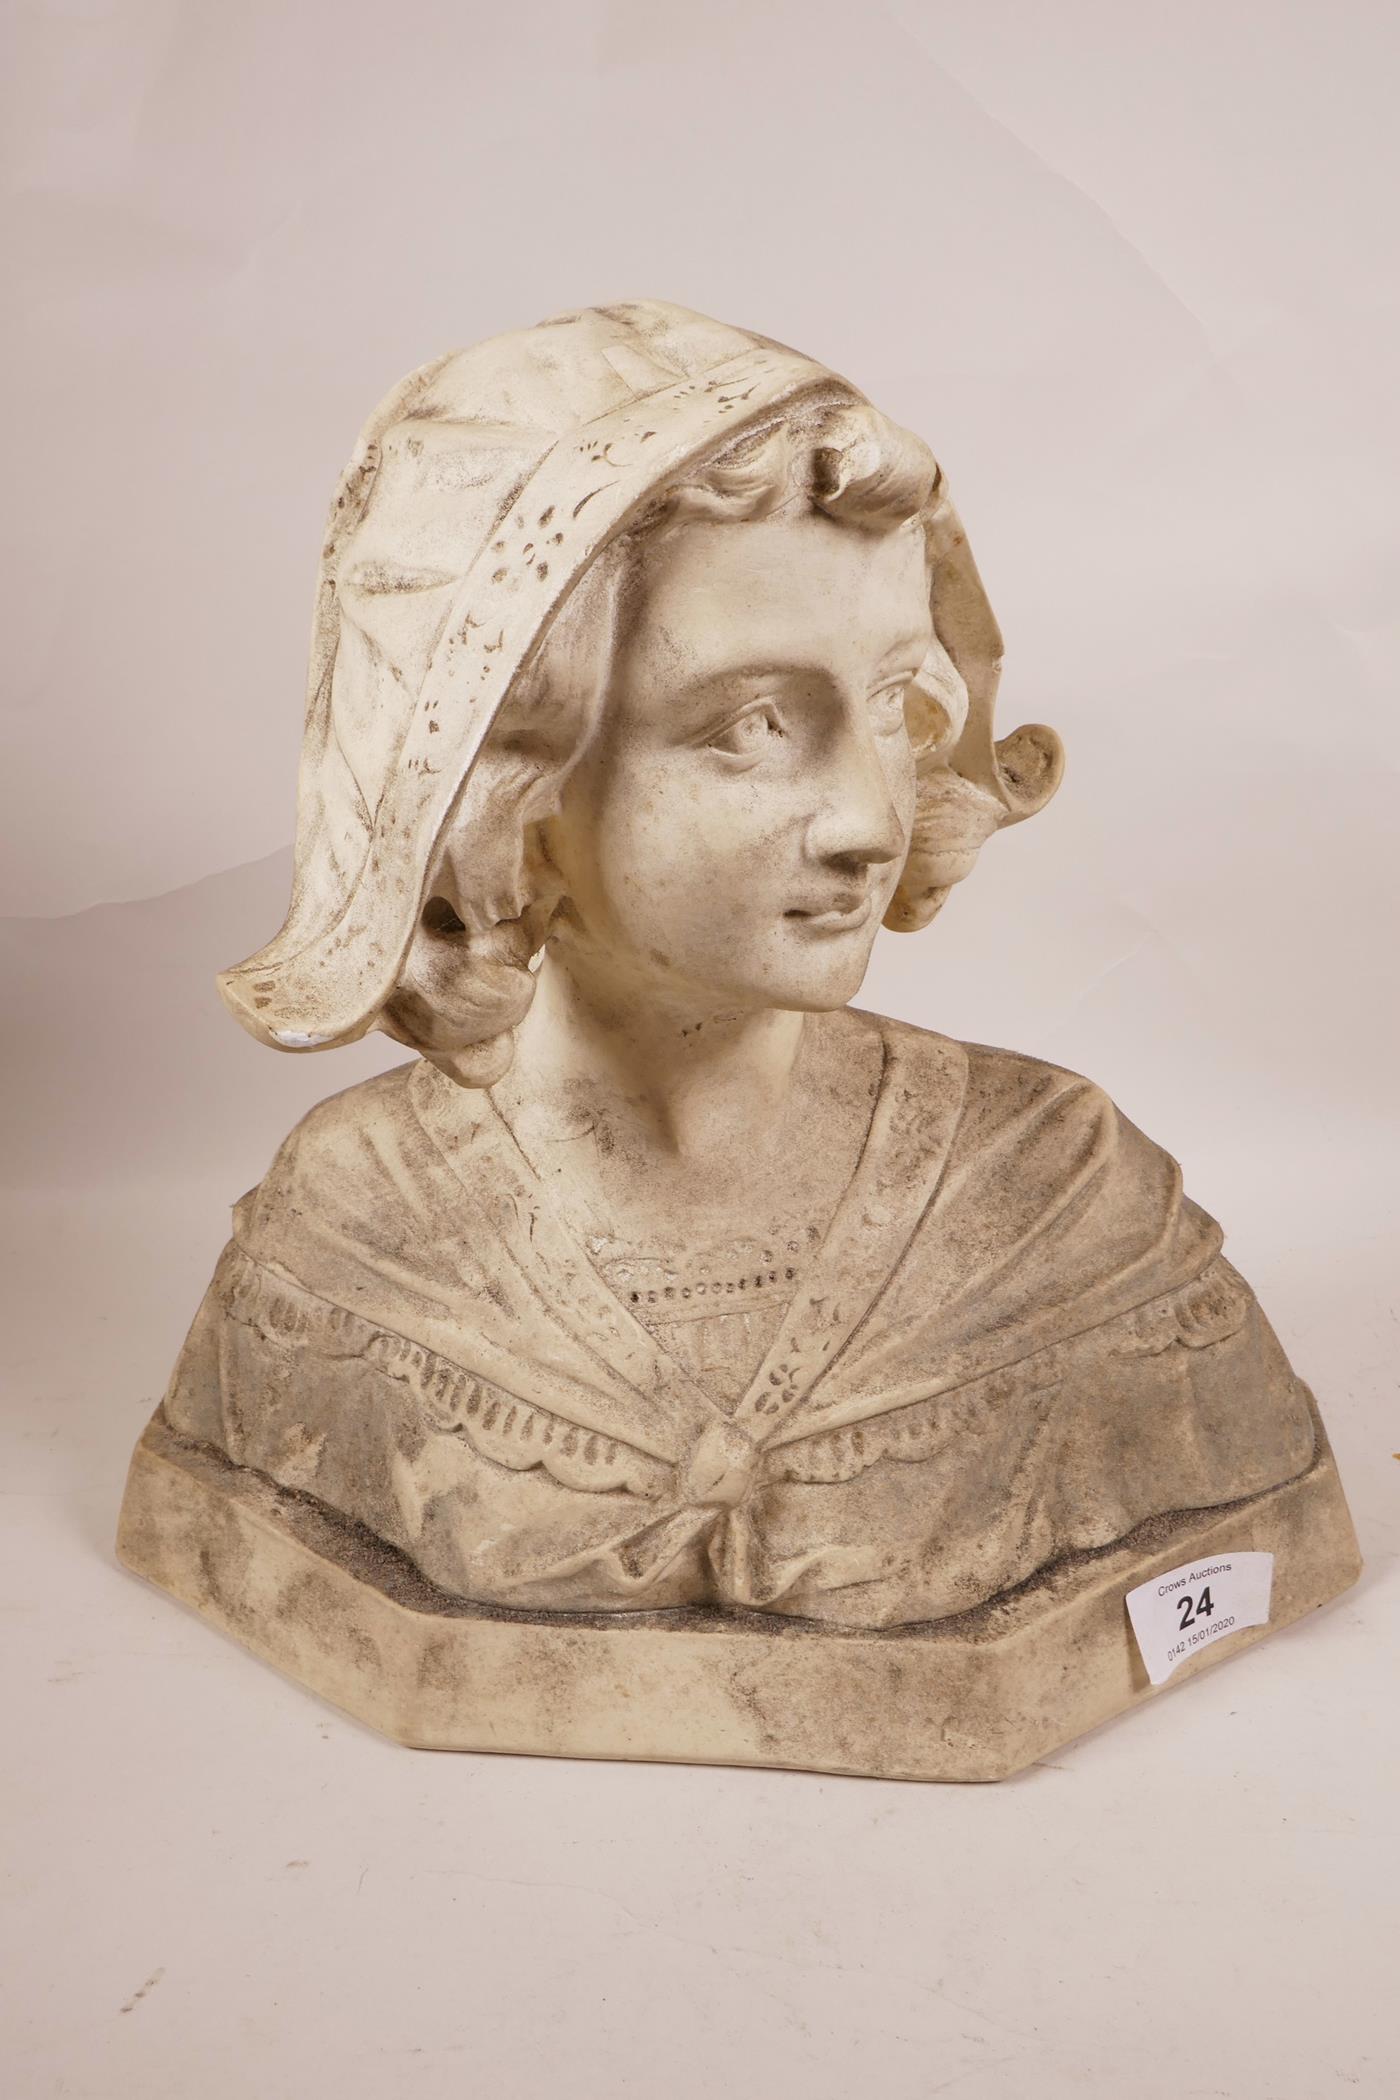 A C19th decorative bust of a Dutch lady in traditional dress, signed J. Gianelli, plaster cast,